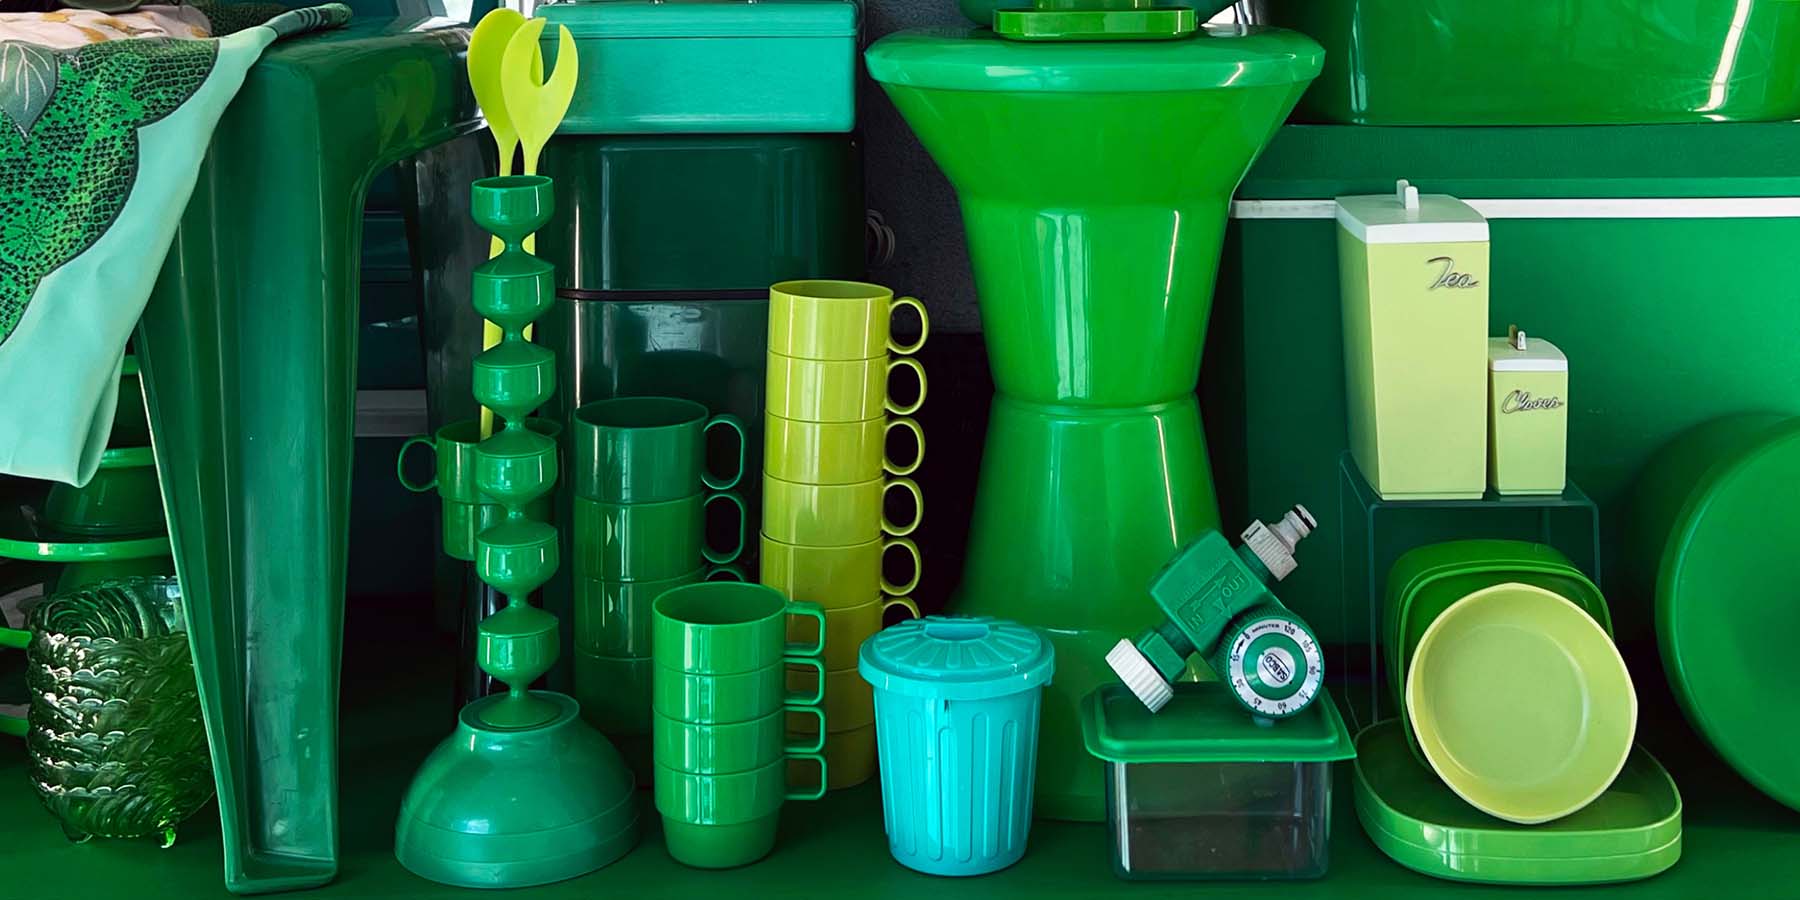 group of green items including cups